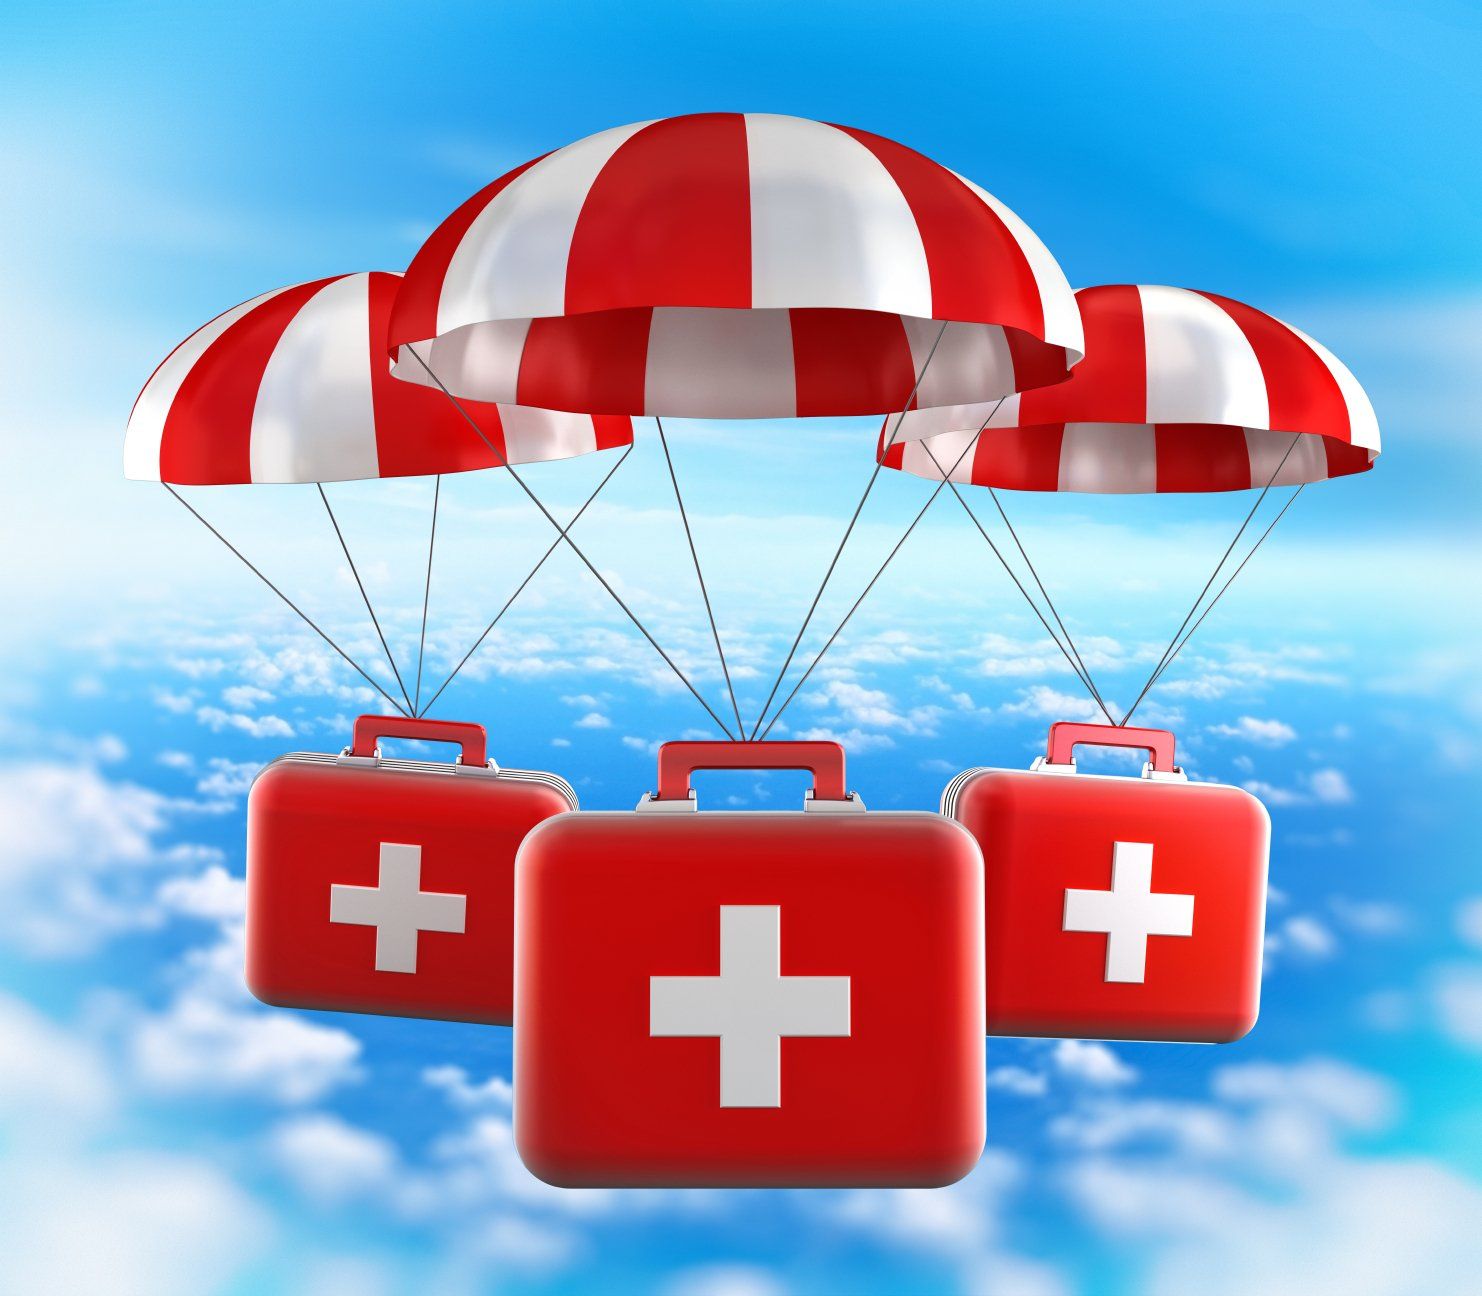 About us page. Image shows three parachutes carrying first aid kits